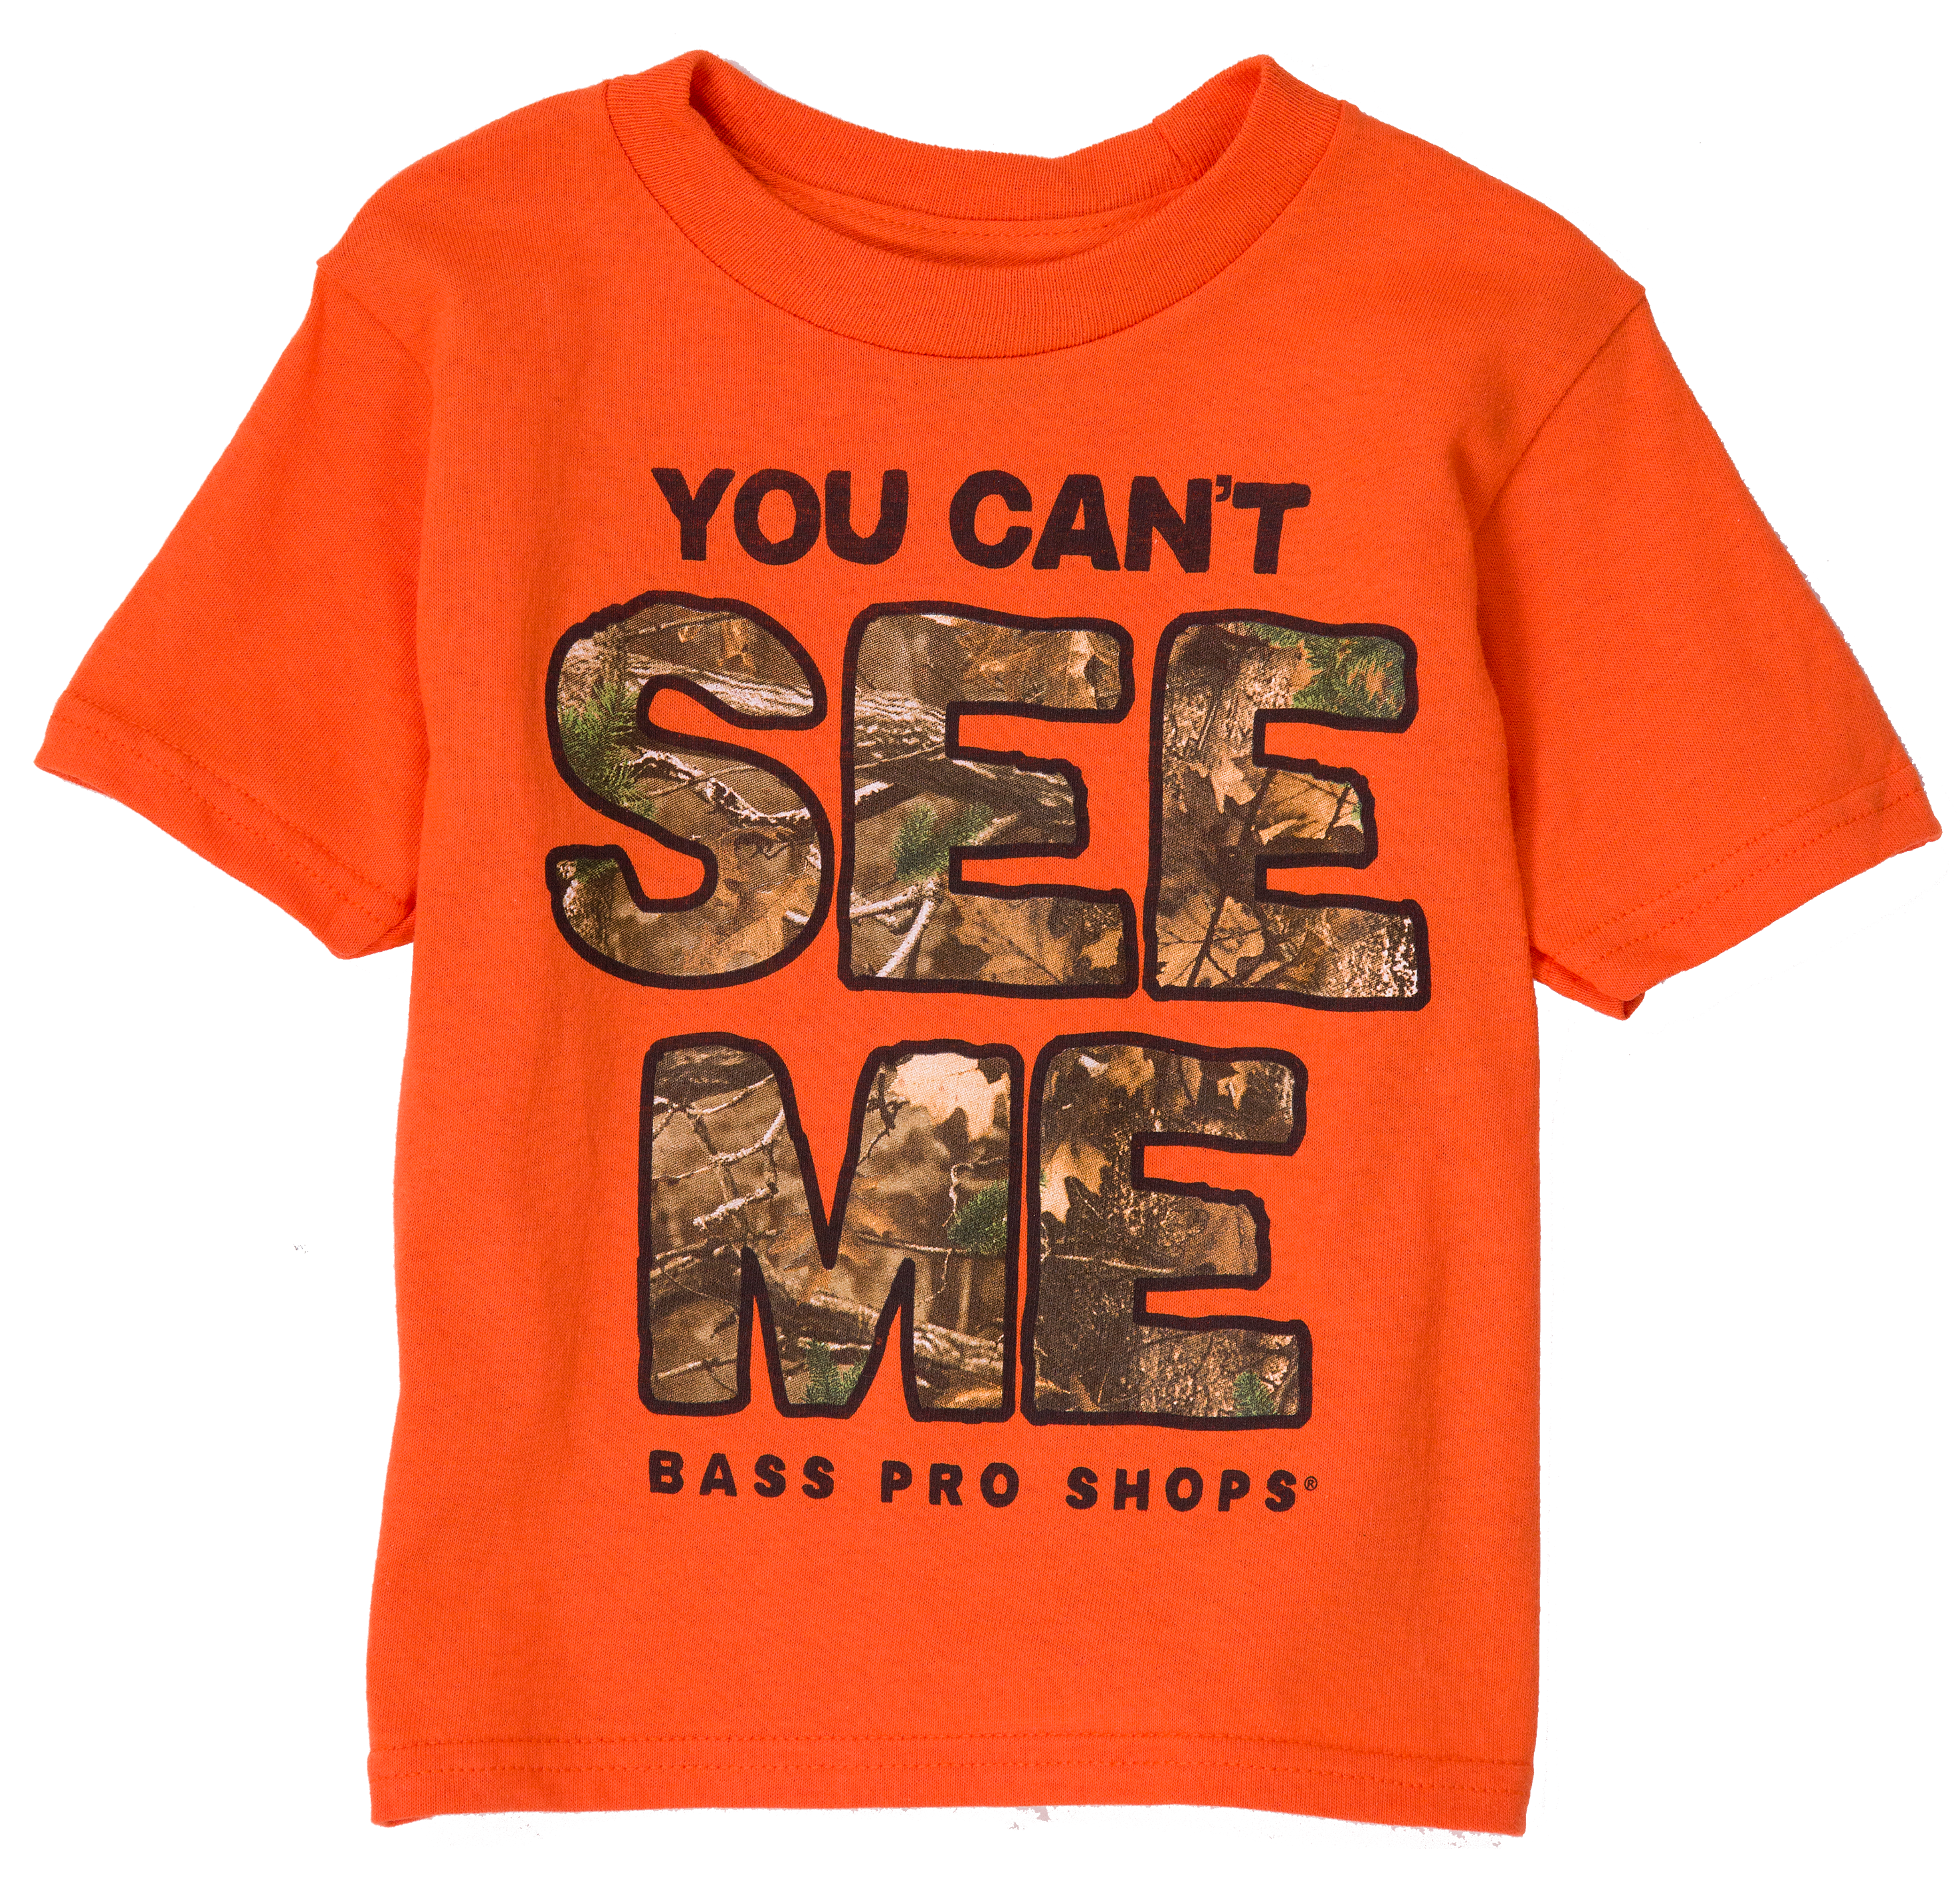 Bass Pro Shops You Can't See Me Short-Sleeve T-Shirt for Toddler Boys